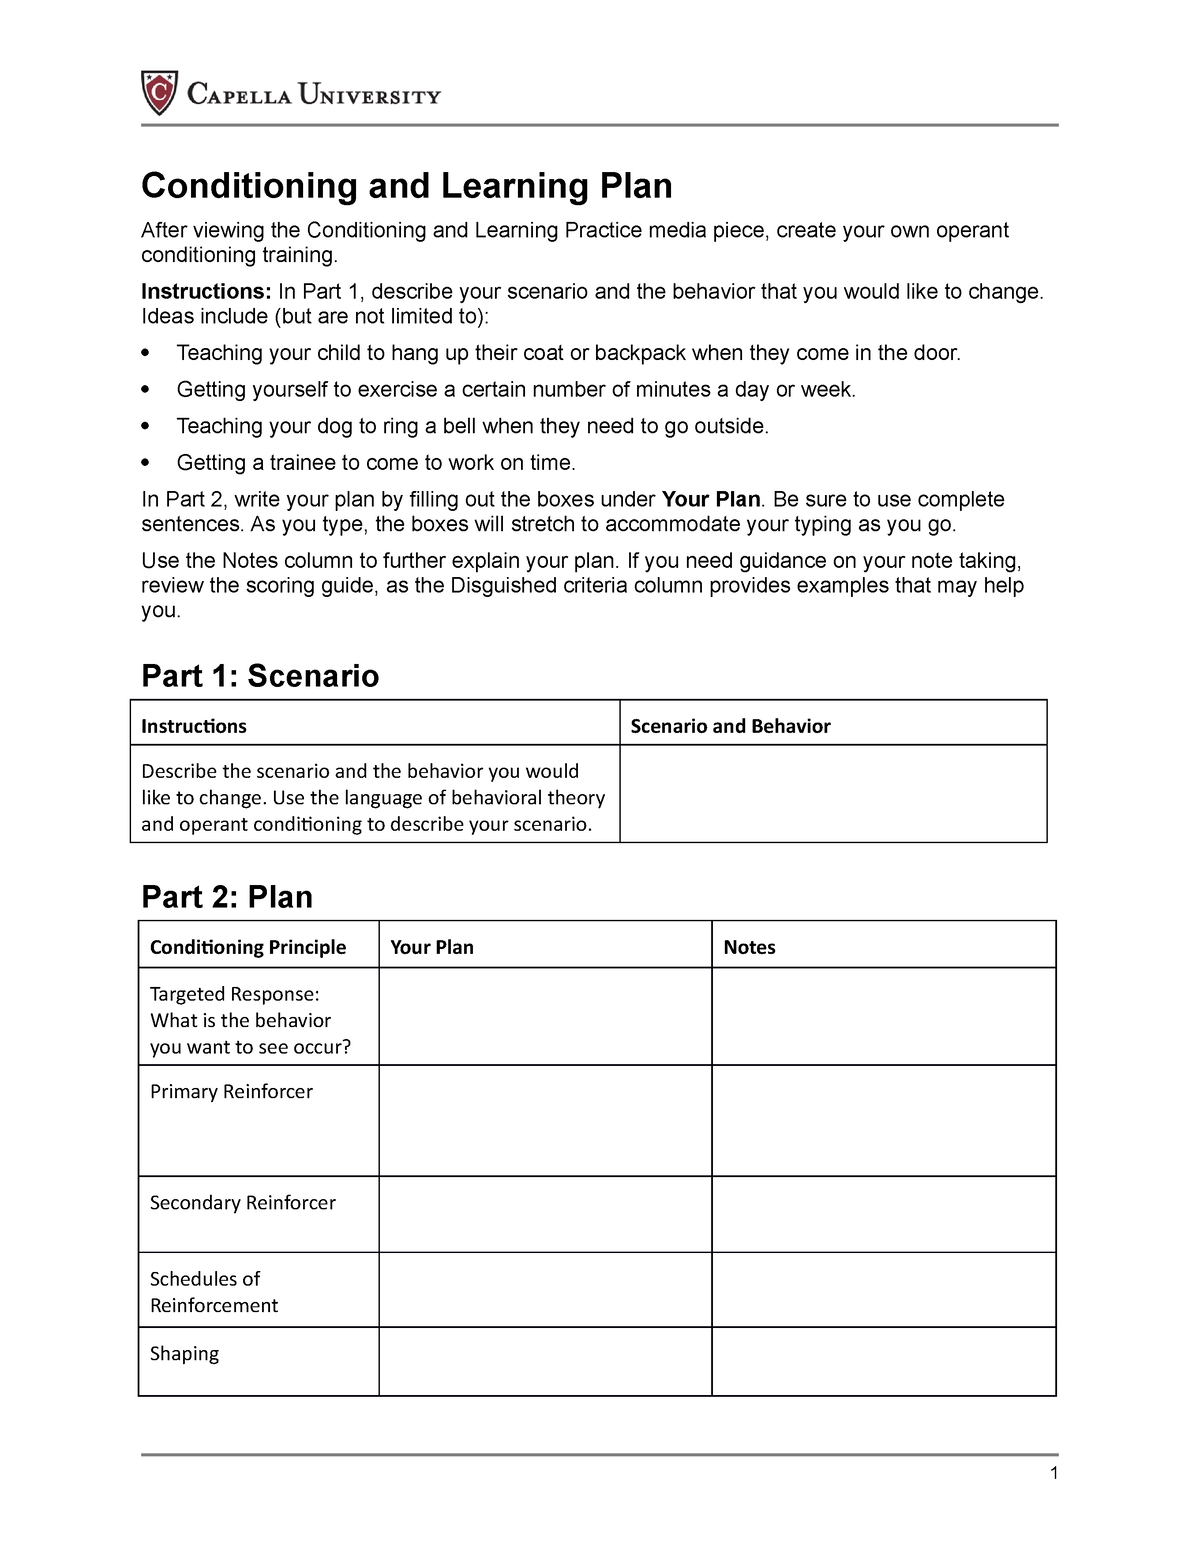 Cf conditioning learning plan - Conditioning and Learning Plan After ...